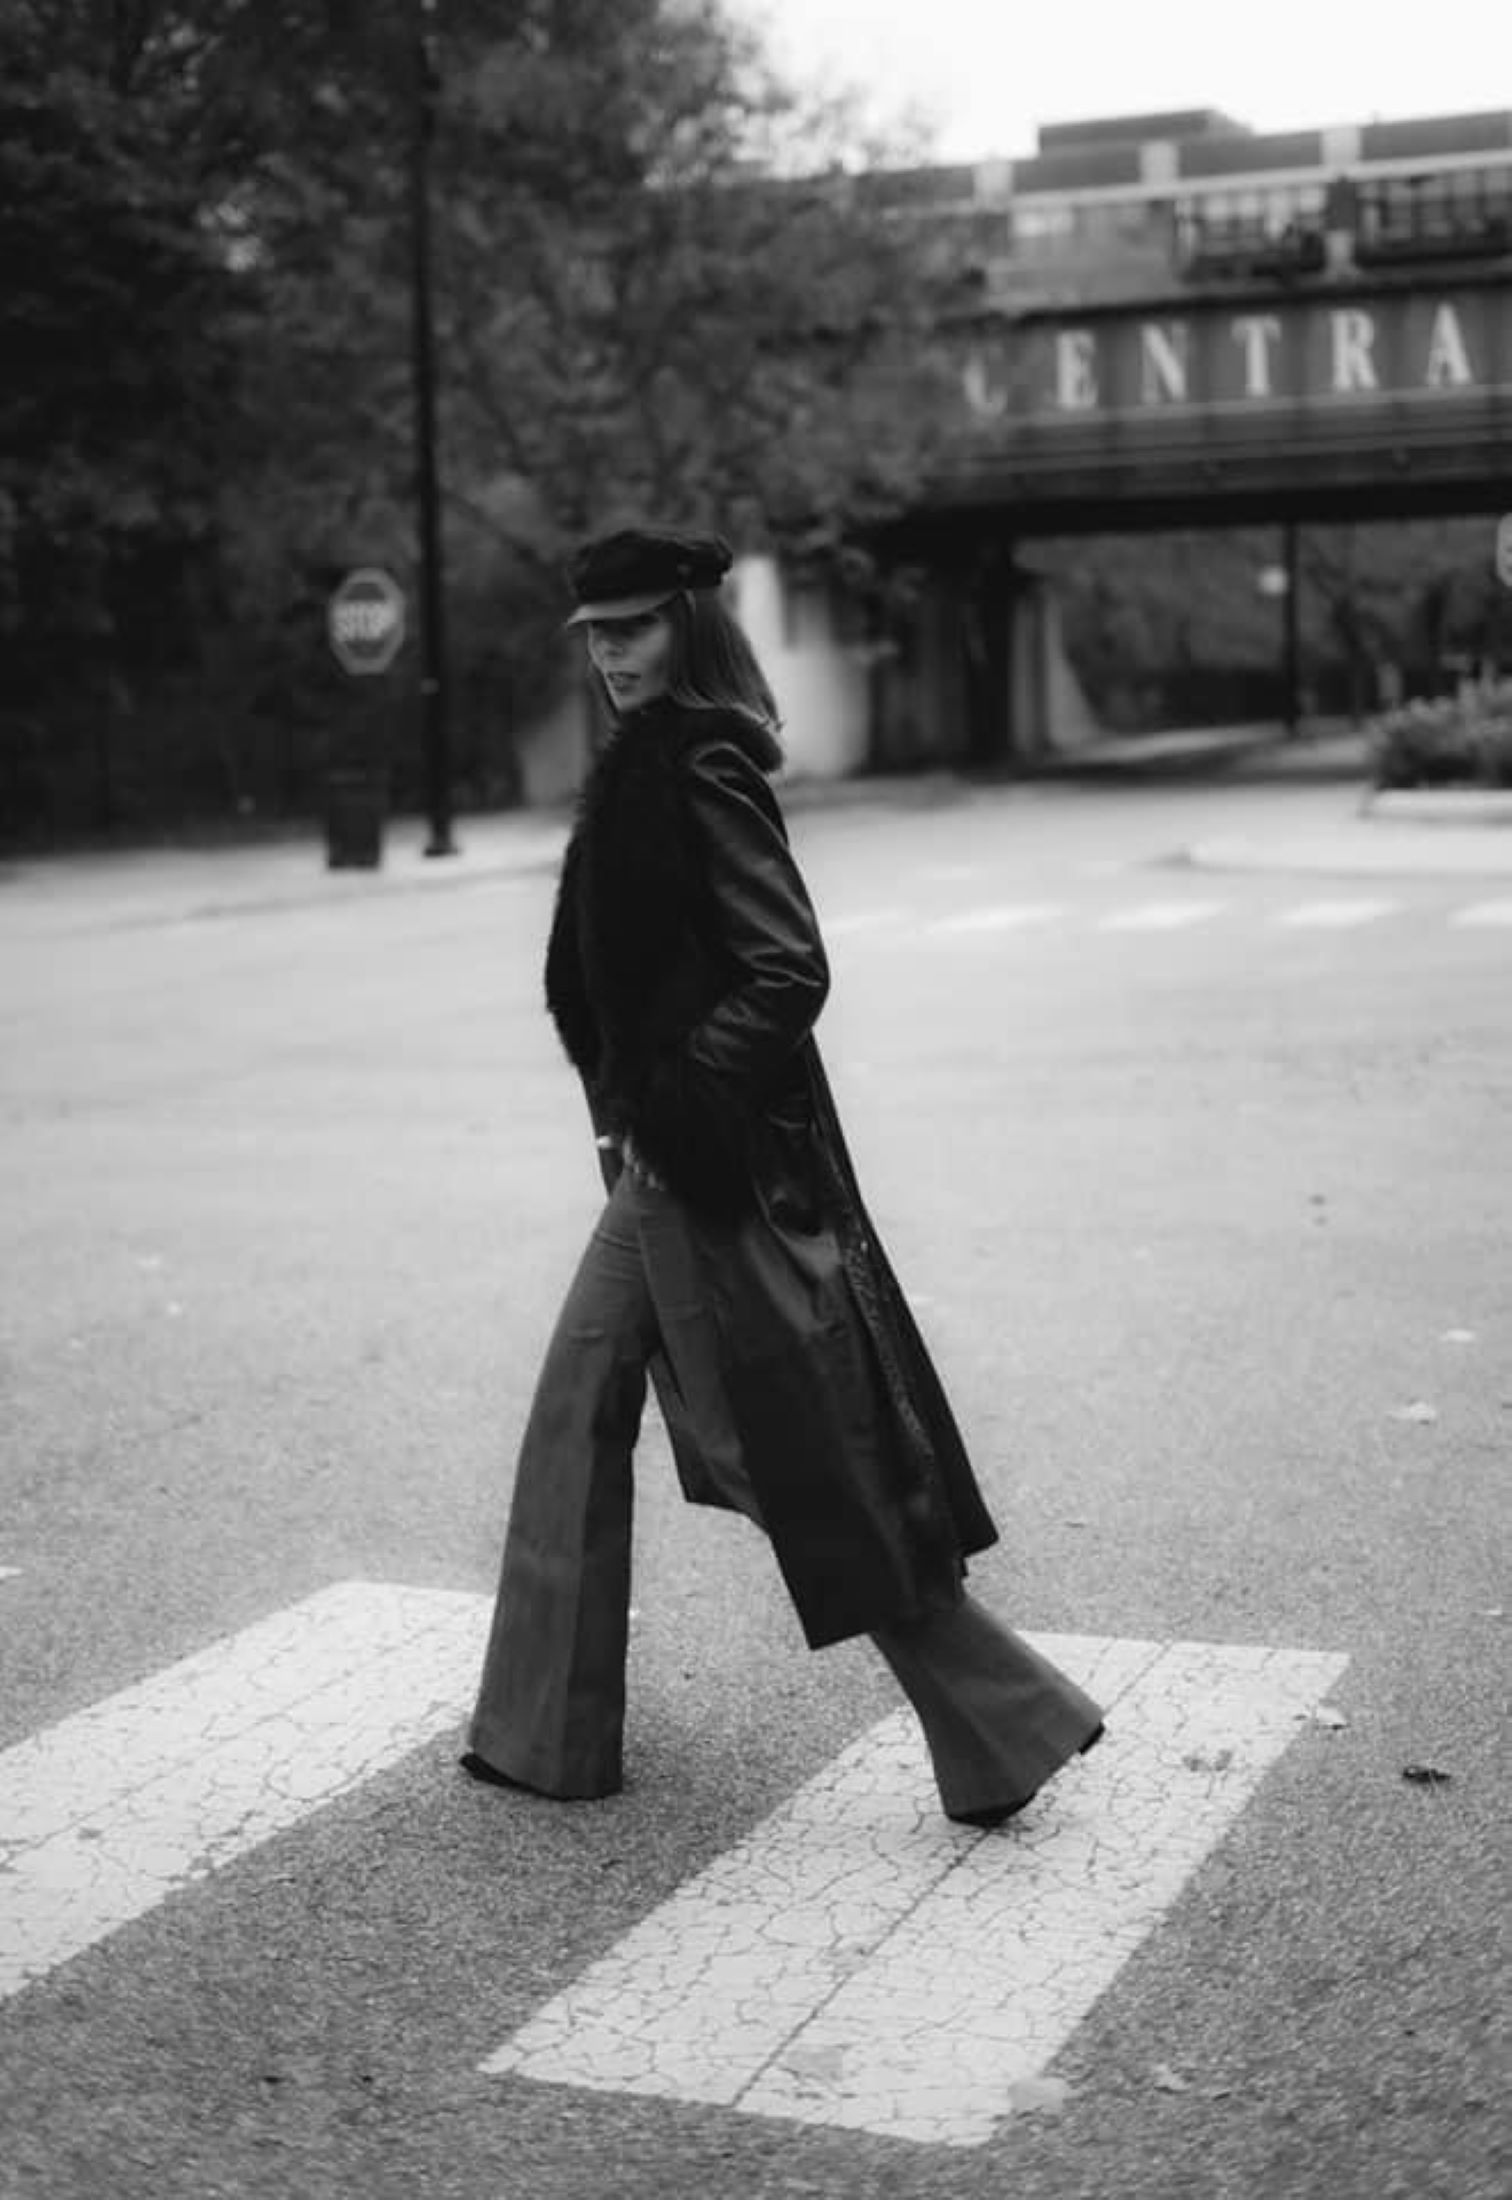 Woman walking across a cross walk while wearing a black leather coat and bell bottom pants